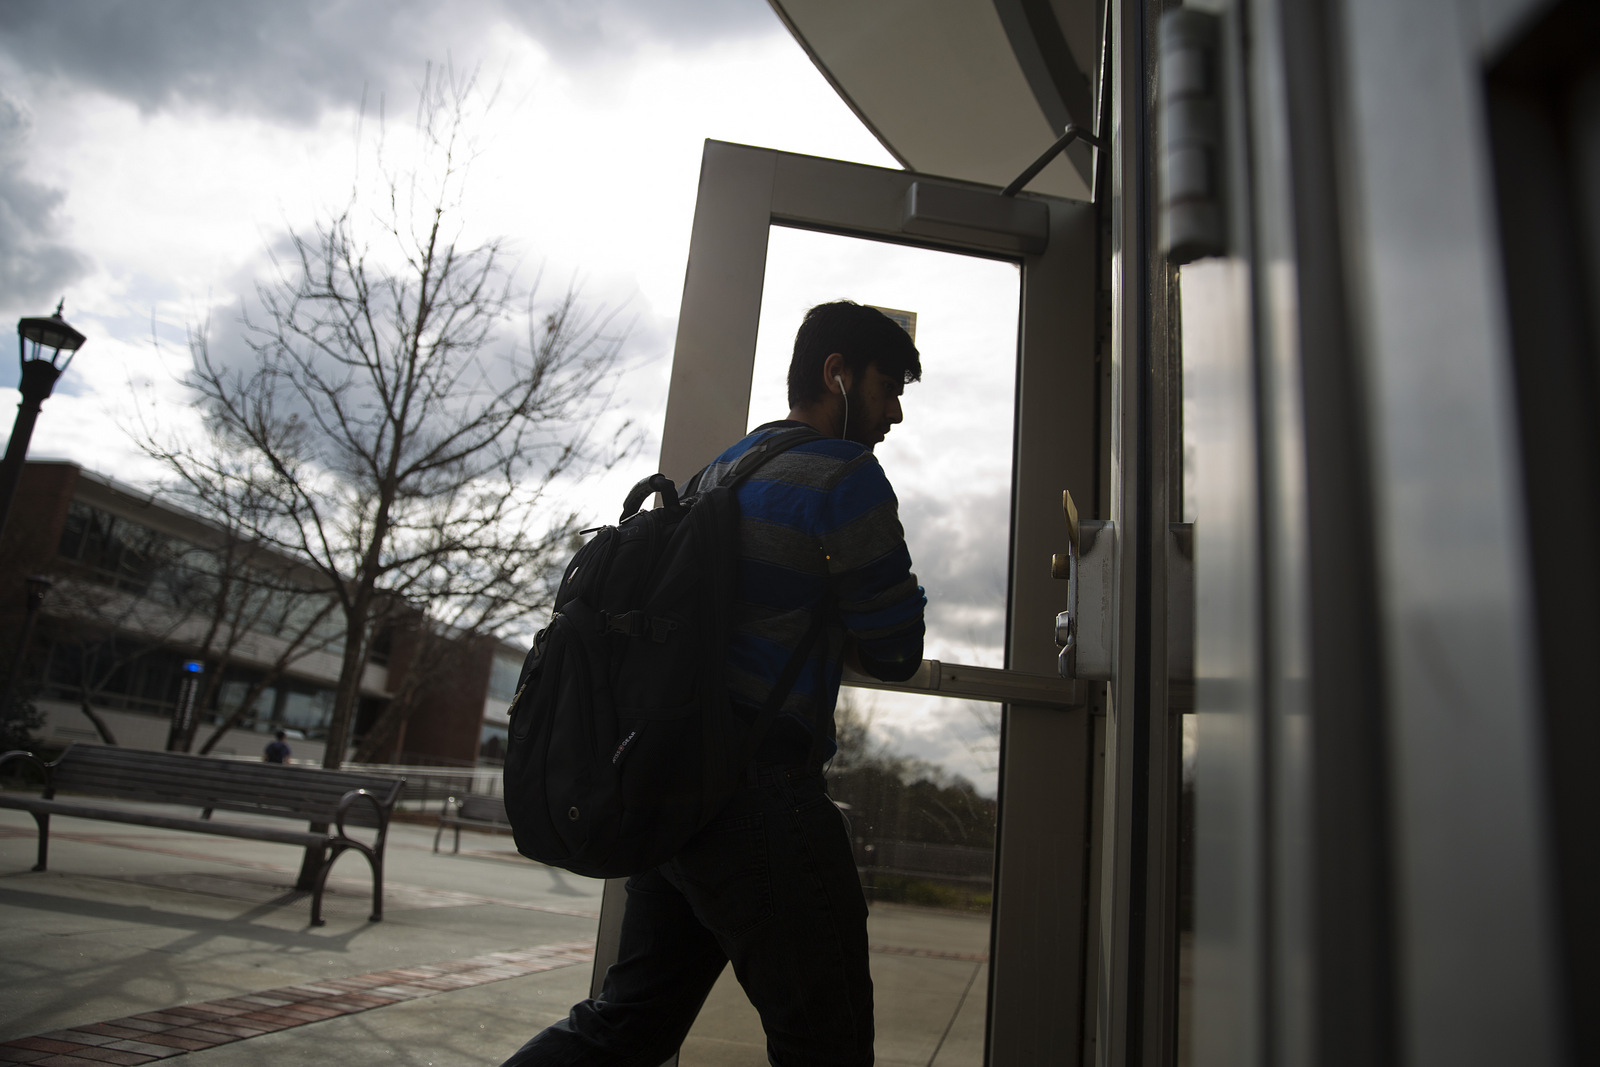 The new documentary “Starving The Beast, reveals the struggle in education funding taking place across the country at publicly funded universities. (AP Photo/David Goldman)